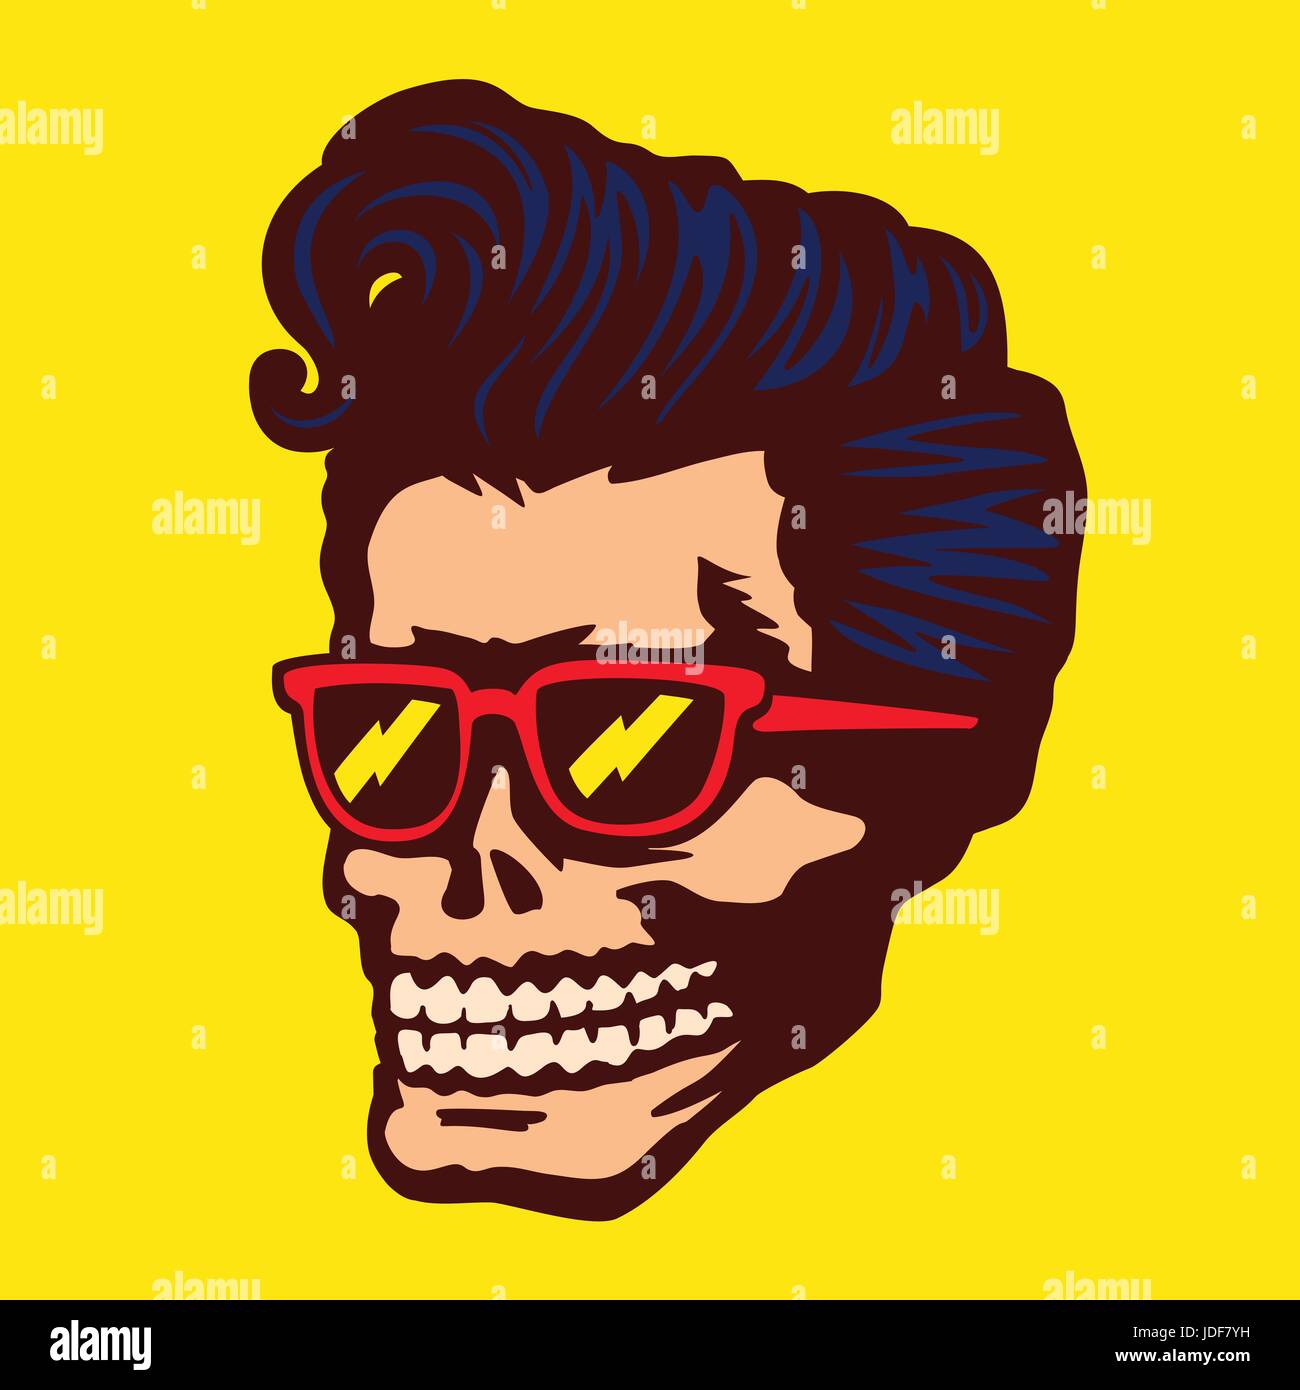 Cool skull zombie head with rockabilly pomp hairstyle and sunglasses tattoo, t-shirt or sticker design rock'n'roll vector illustration Stock Vector